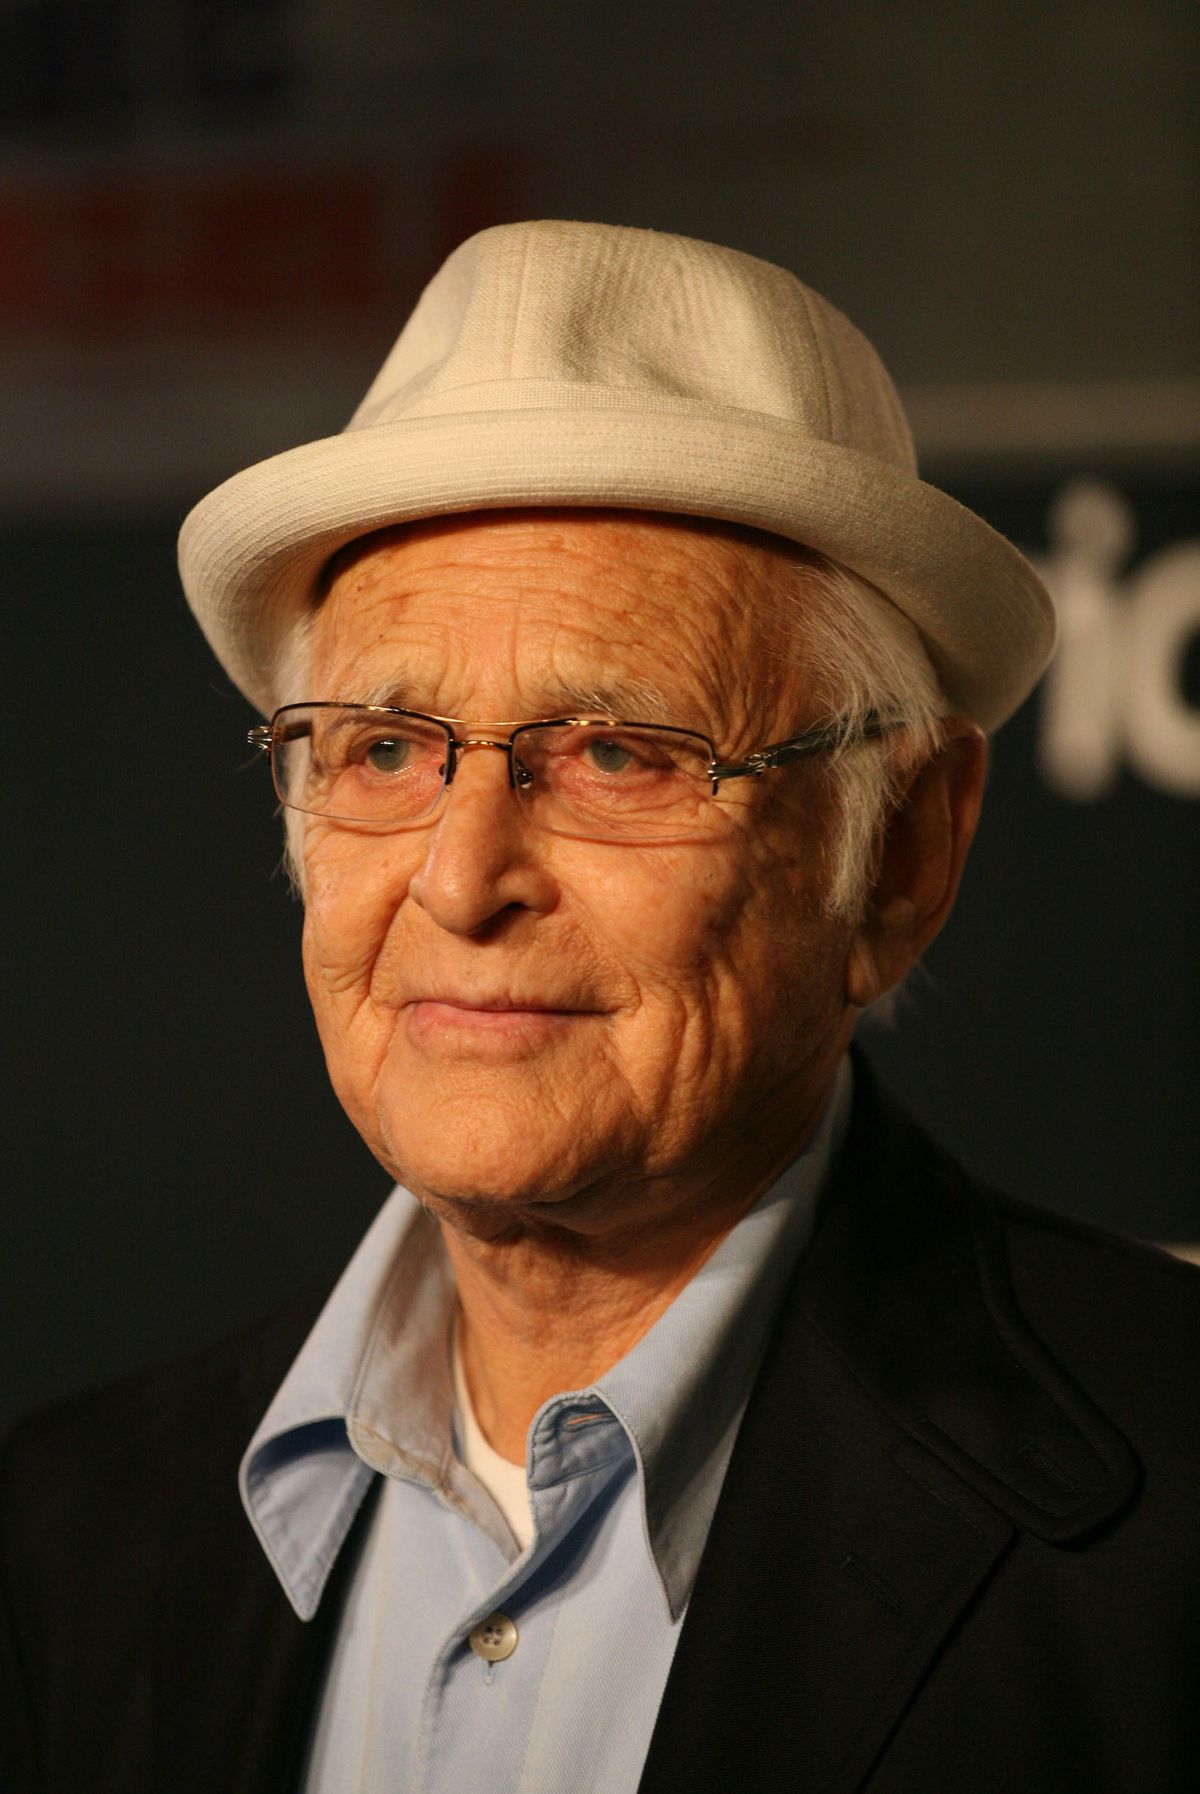 Norman Lear in 2007, at the Hollywood Celebrates 18 Declare Yourself event. Lear died at 101.  (Marianna Day Massey/ZUMA Wire/TNS)